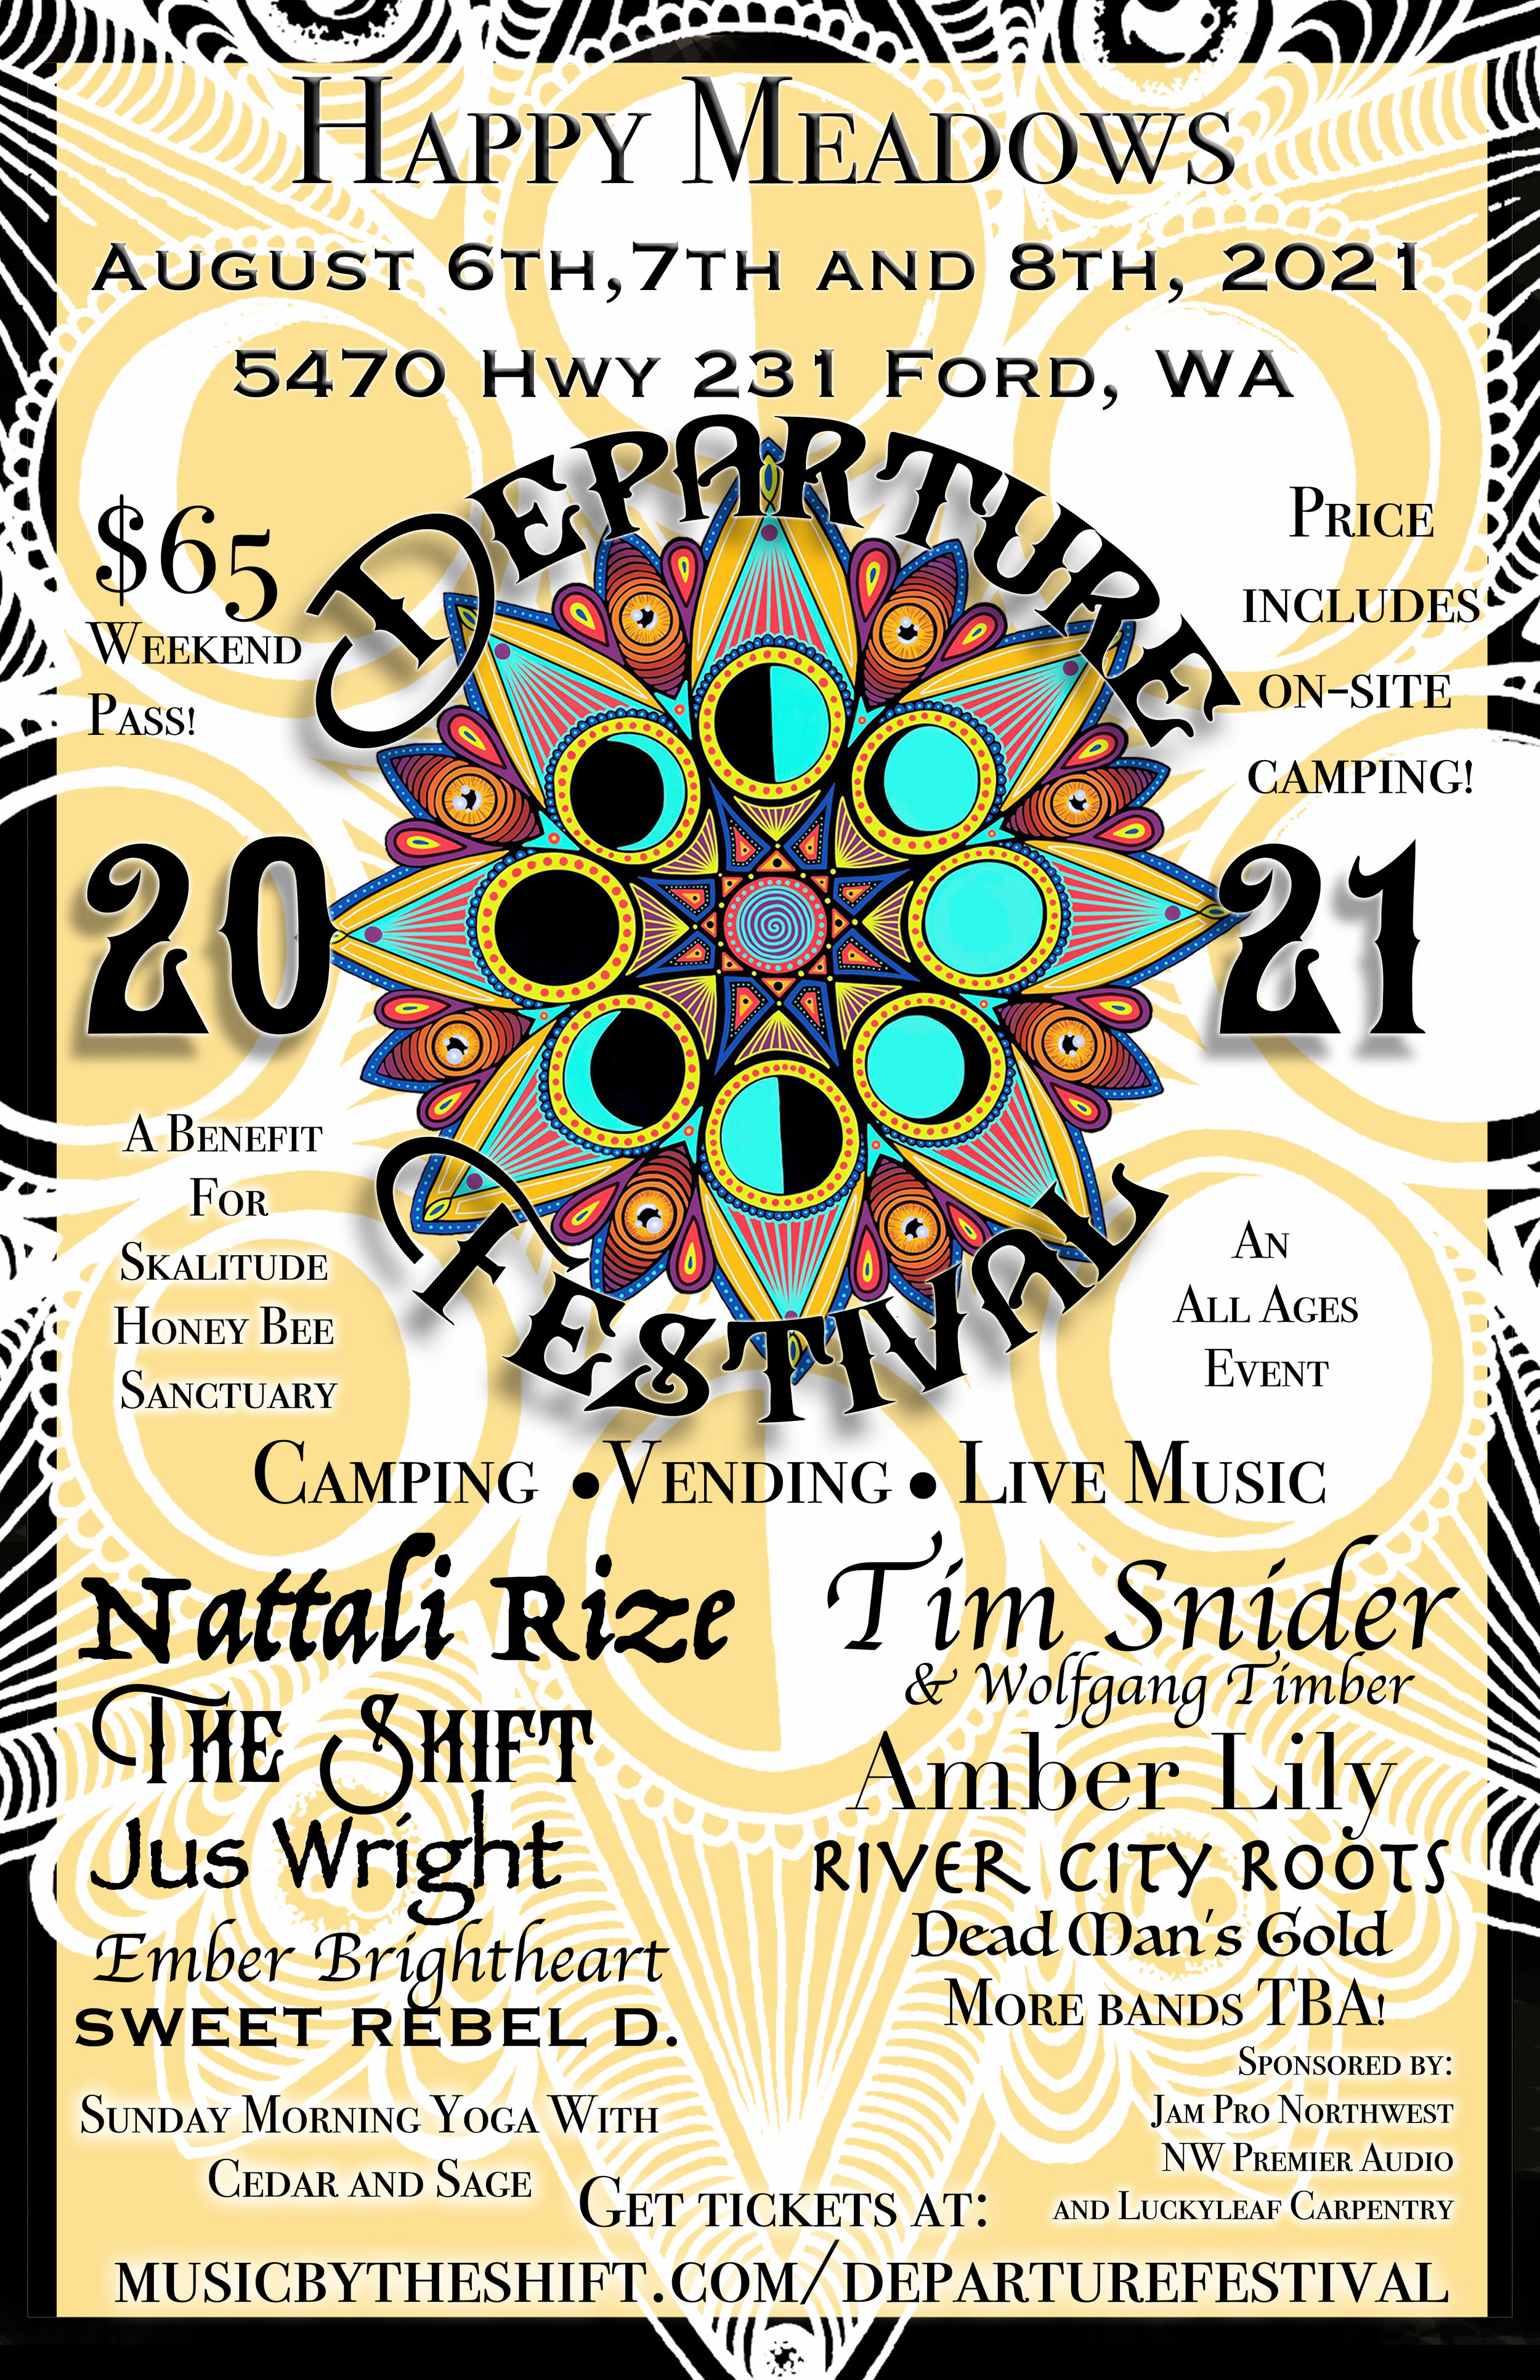 Departure Festival comes to Ford, WA August 6th – 8th, 2021